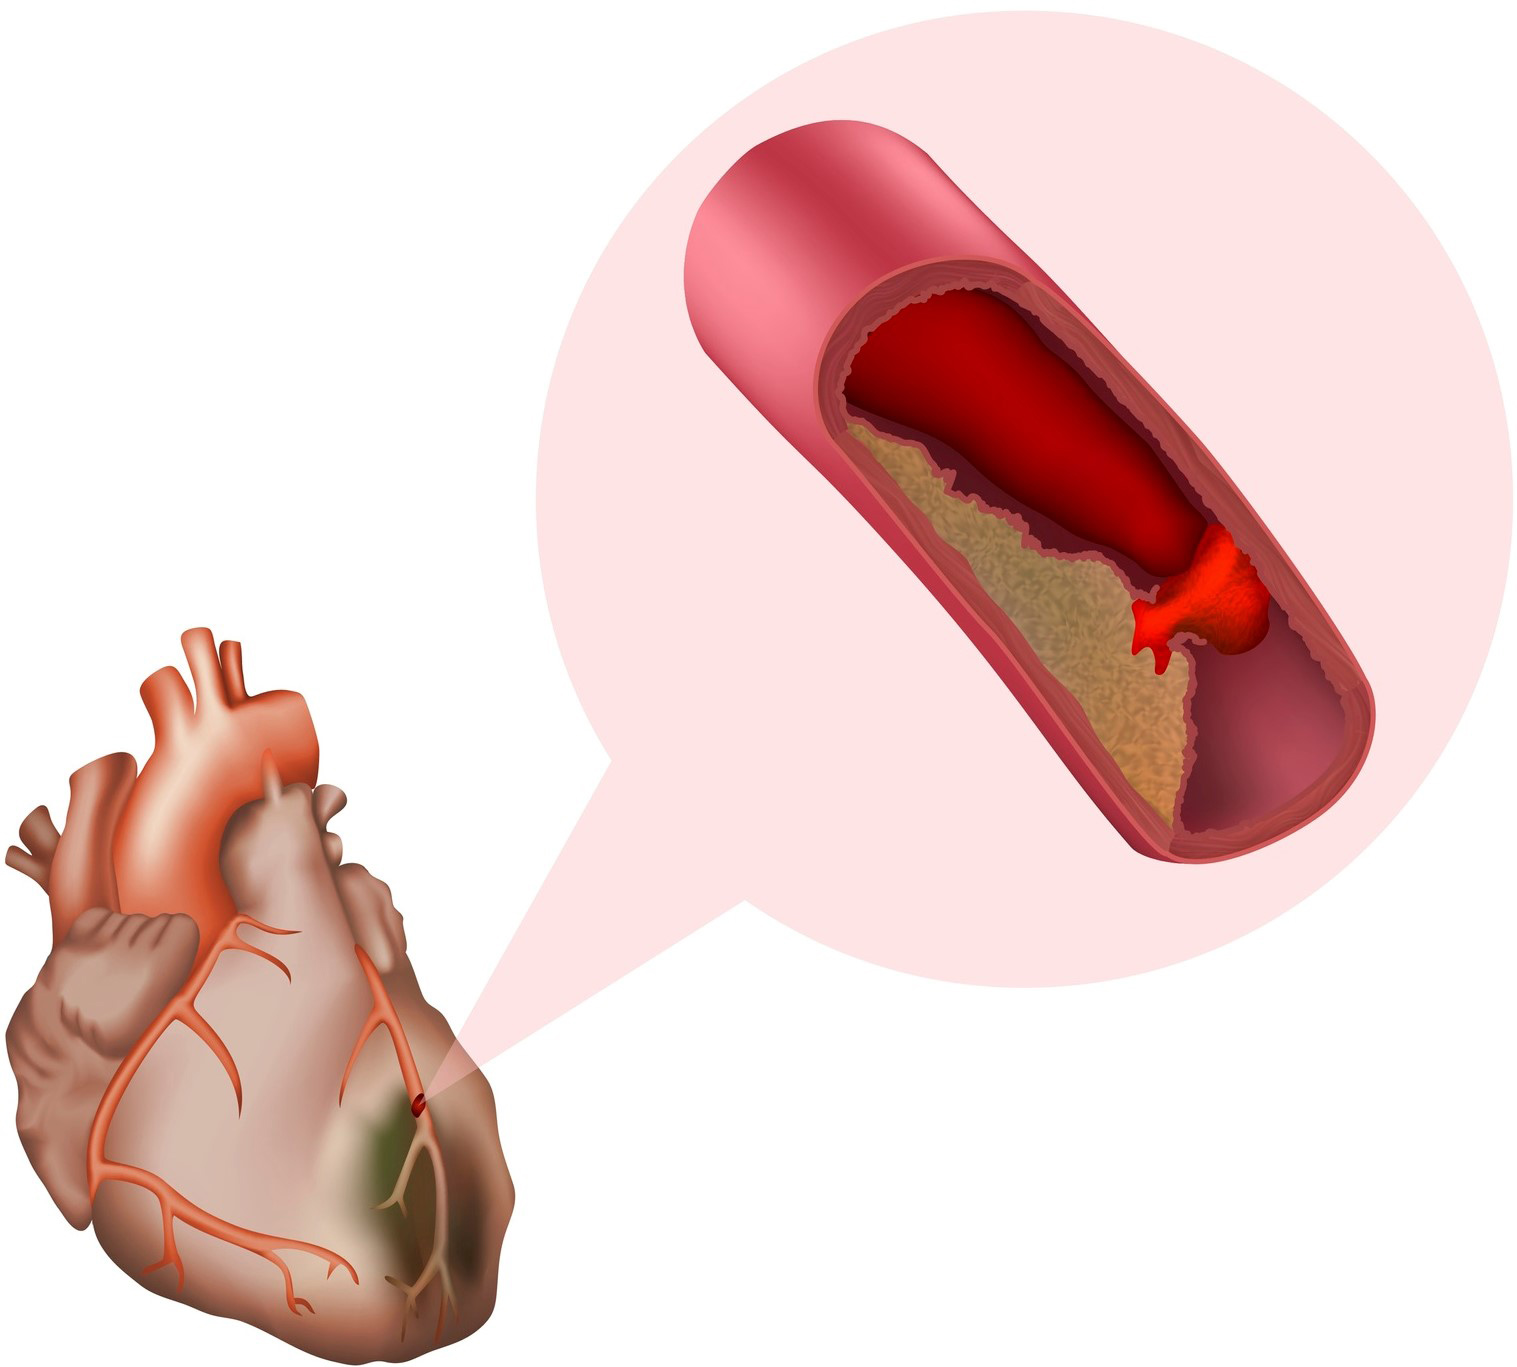 An image of a heart with a speech bubble showing a close-up of a device